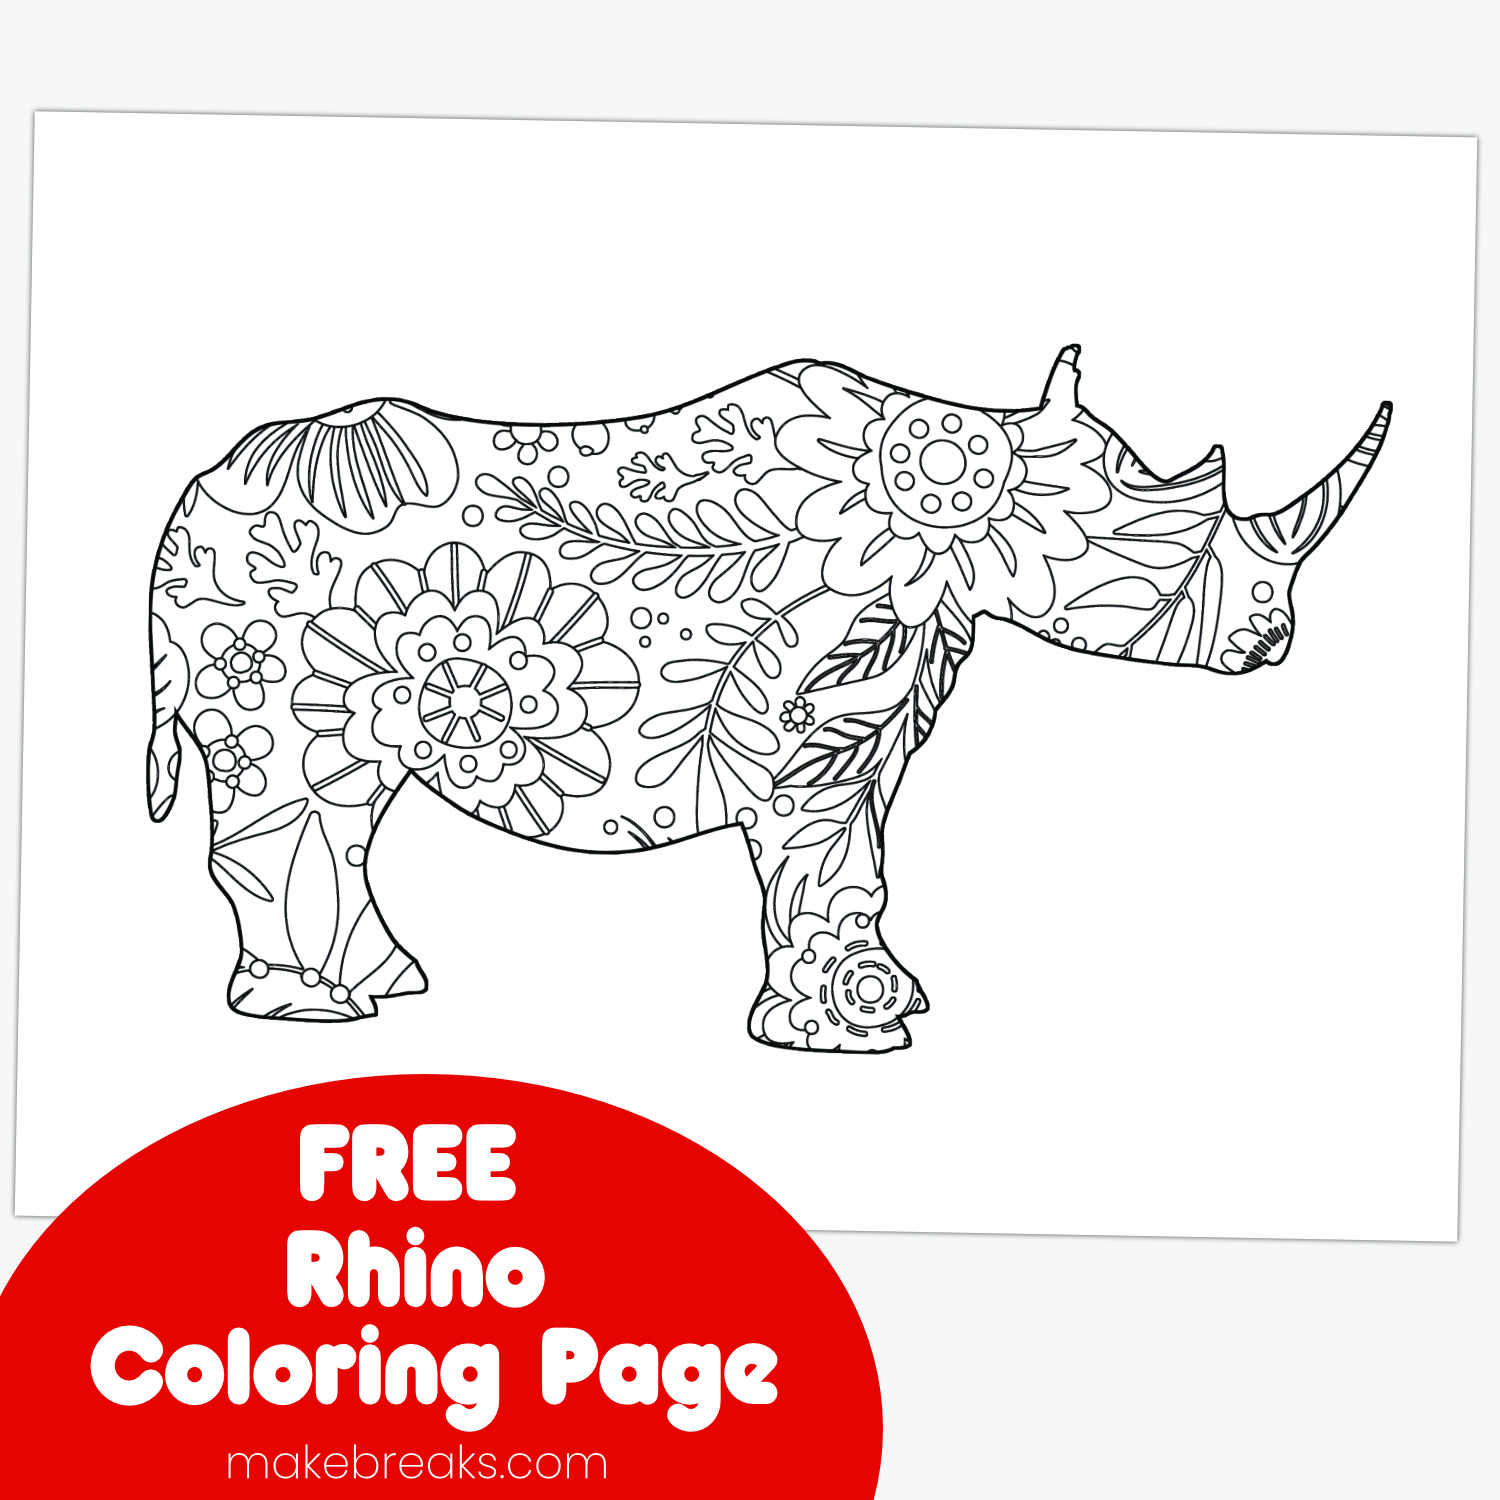 Unleash Your Creativity with Our Intricate Rhino Coloring Page!